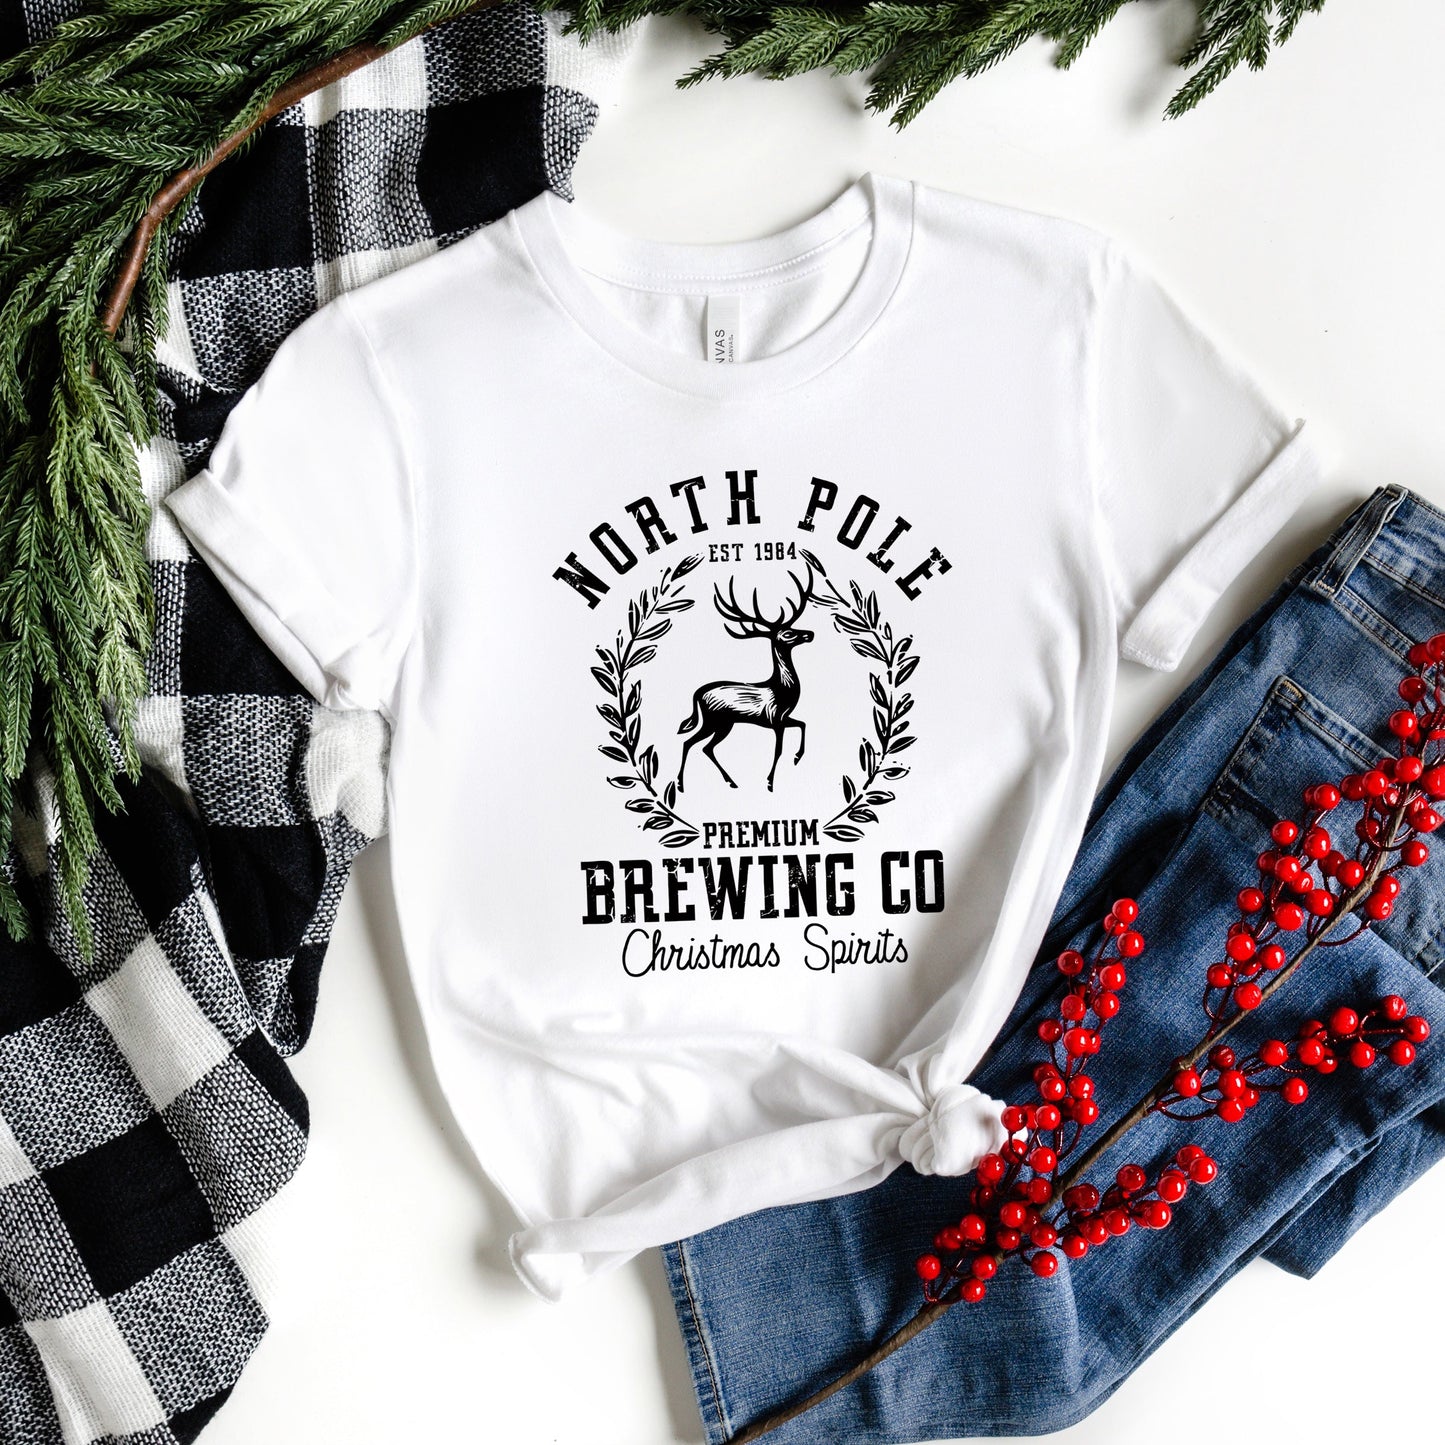 Clearance North Pole Brewing Co | Short Sleeve Crewneck